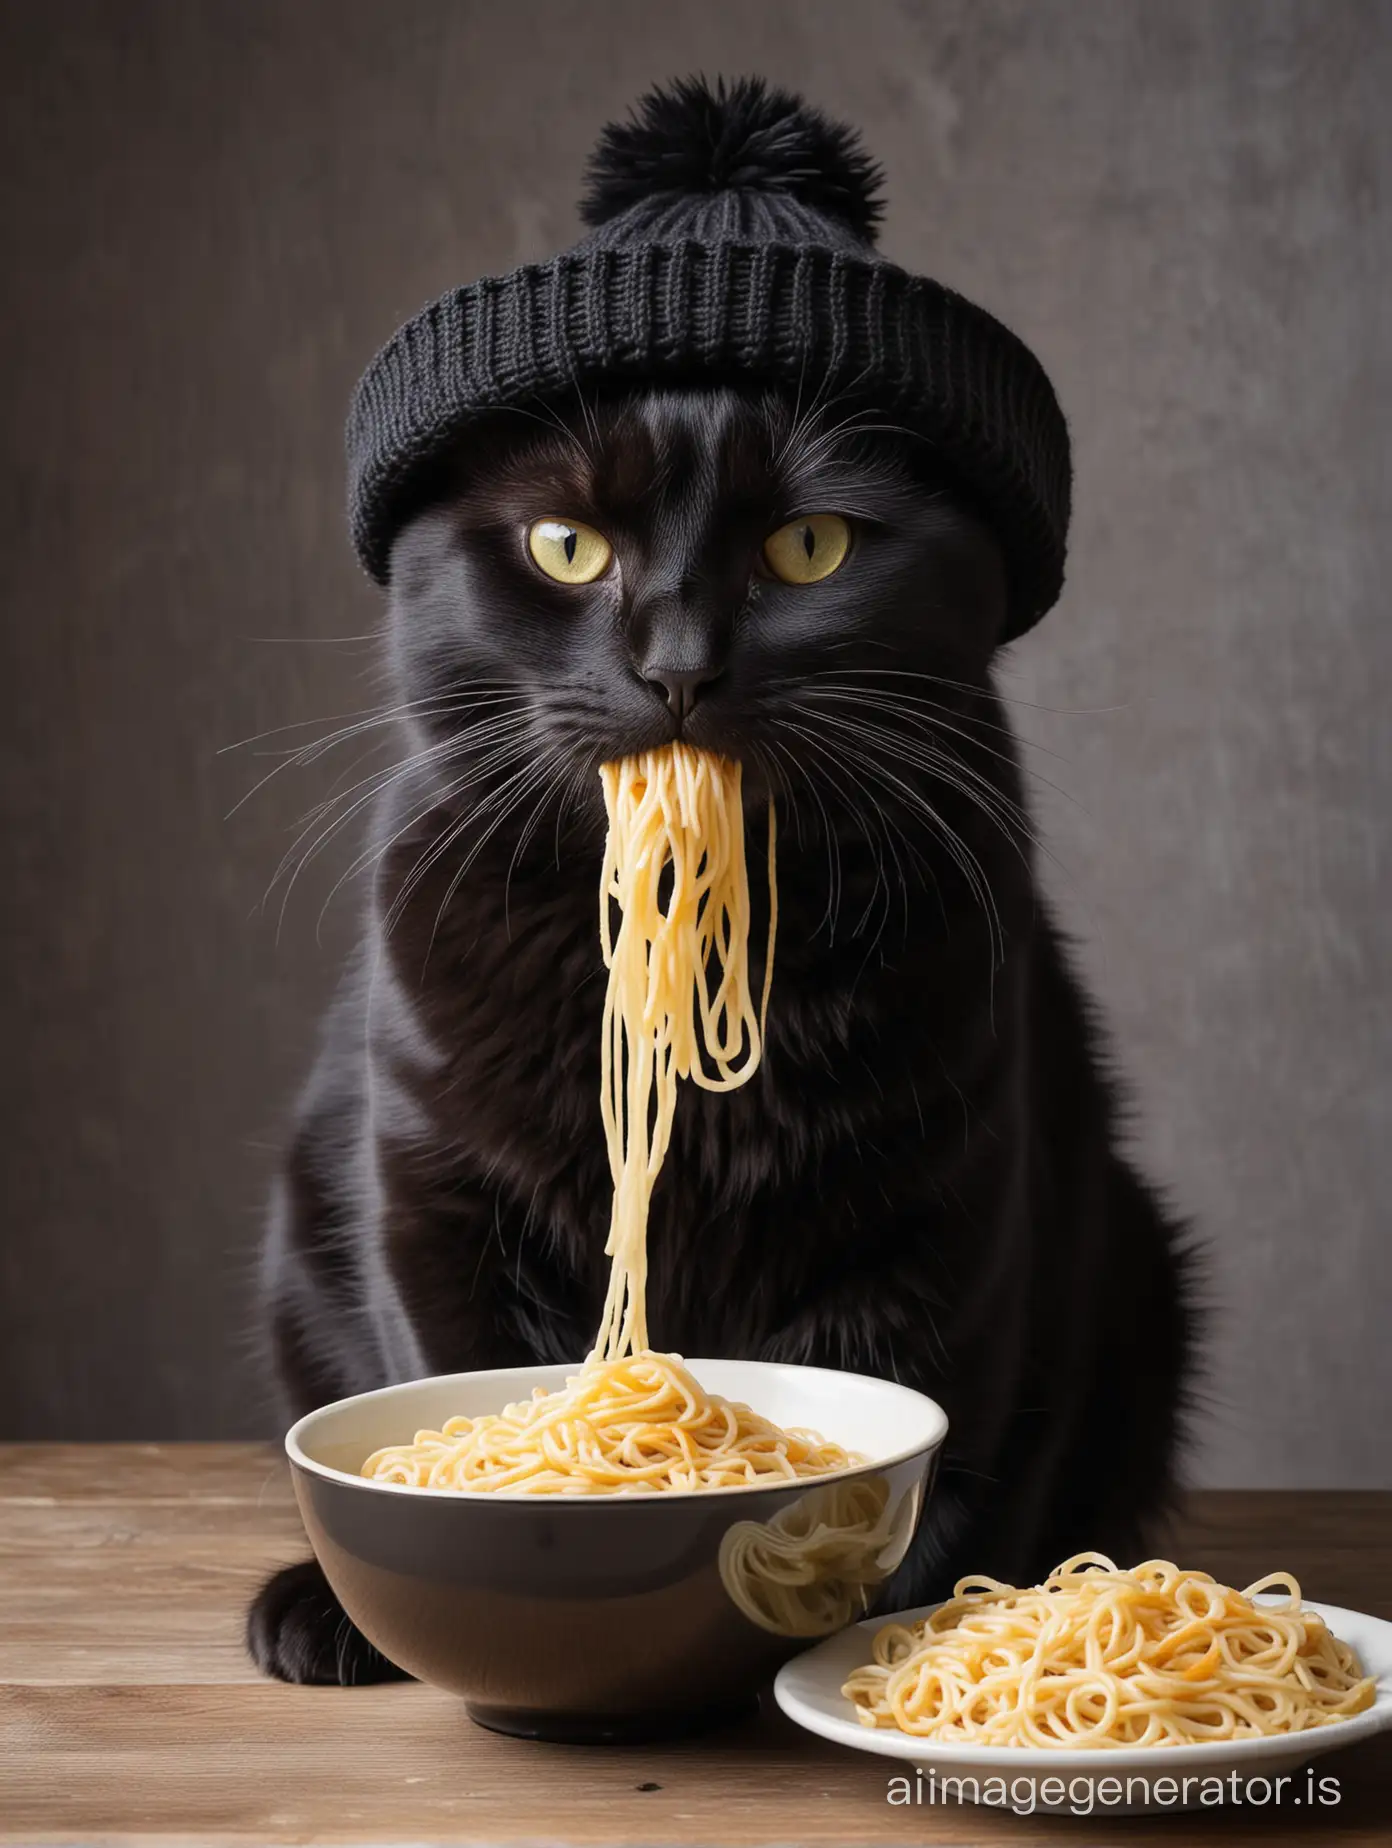 Black cat in a knitted hat eats noodles